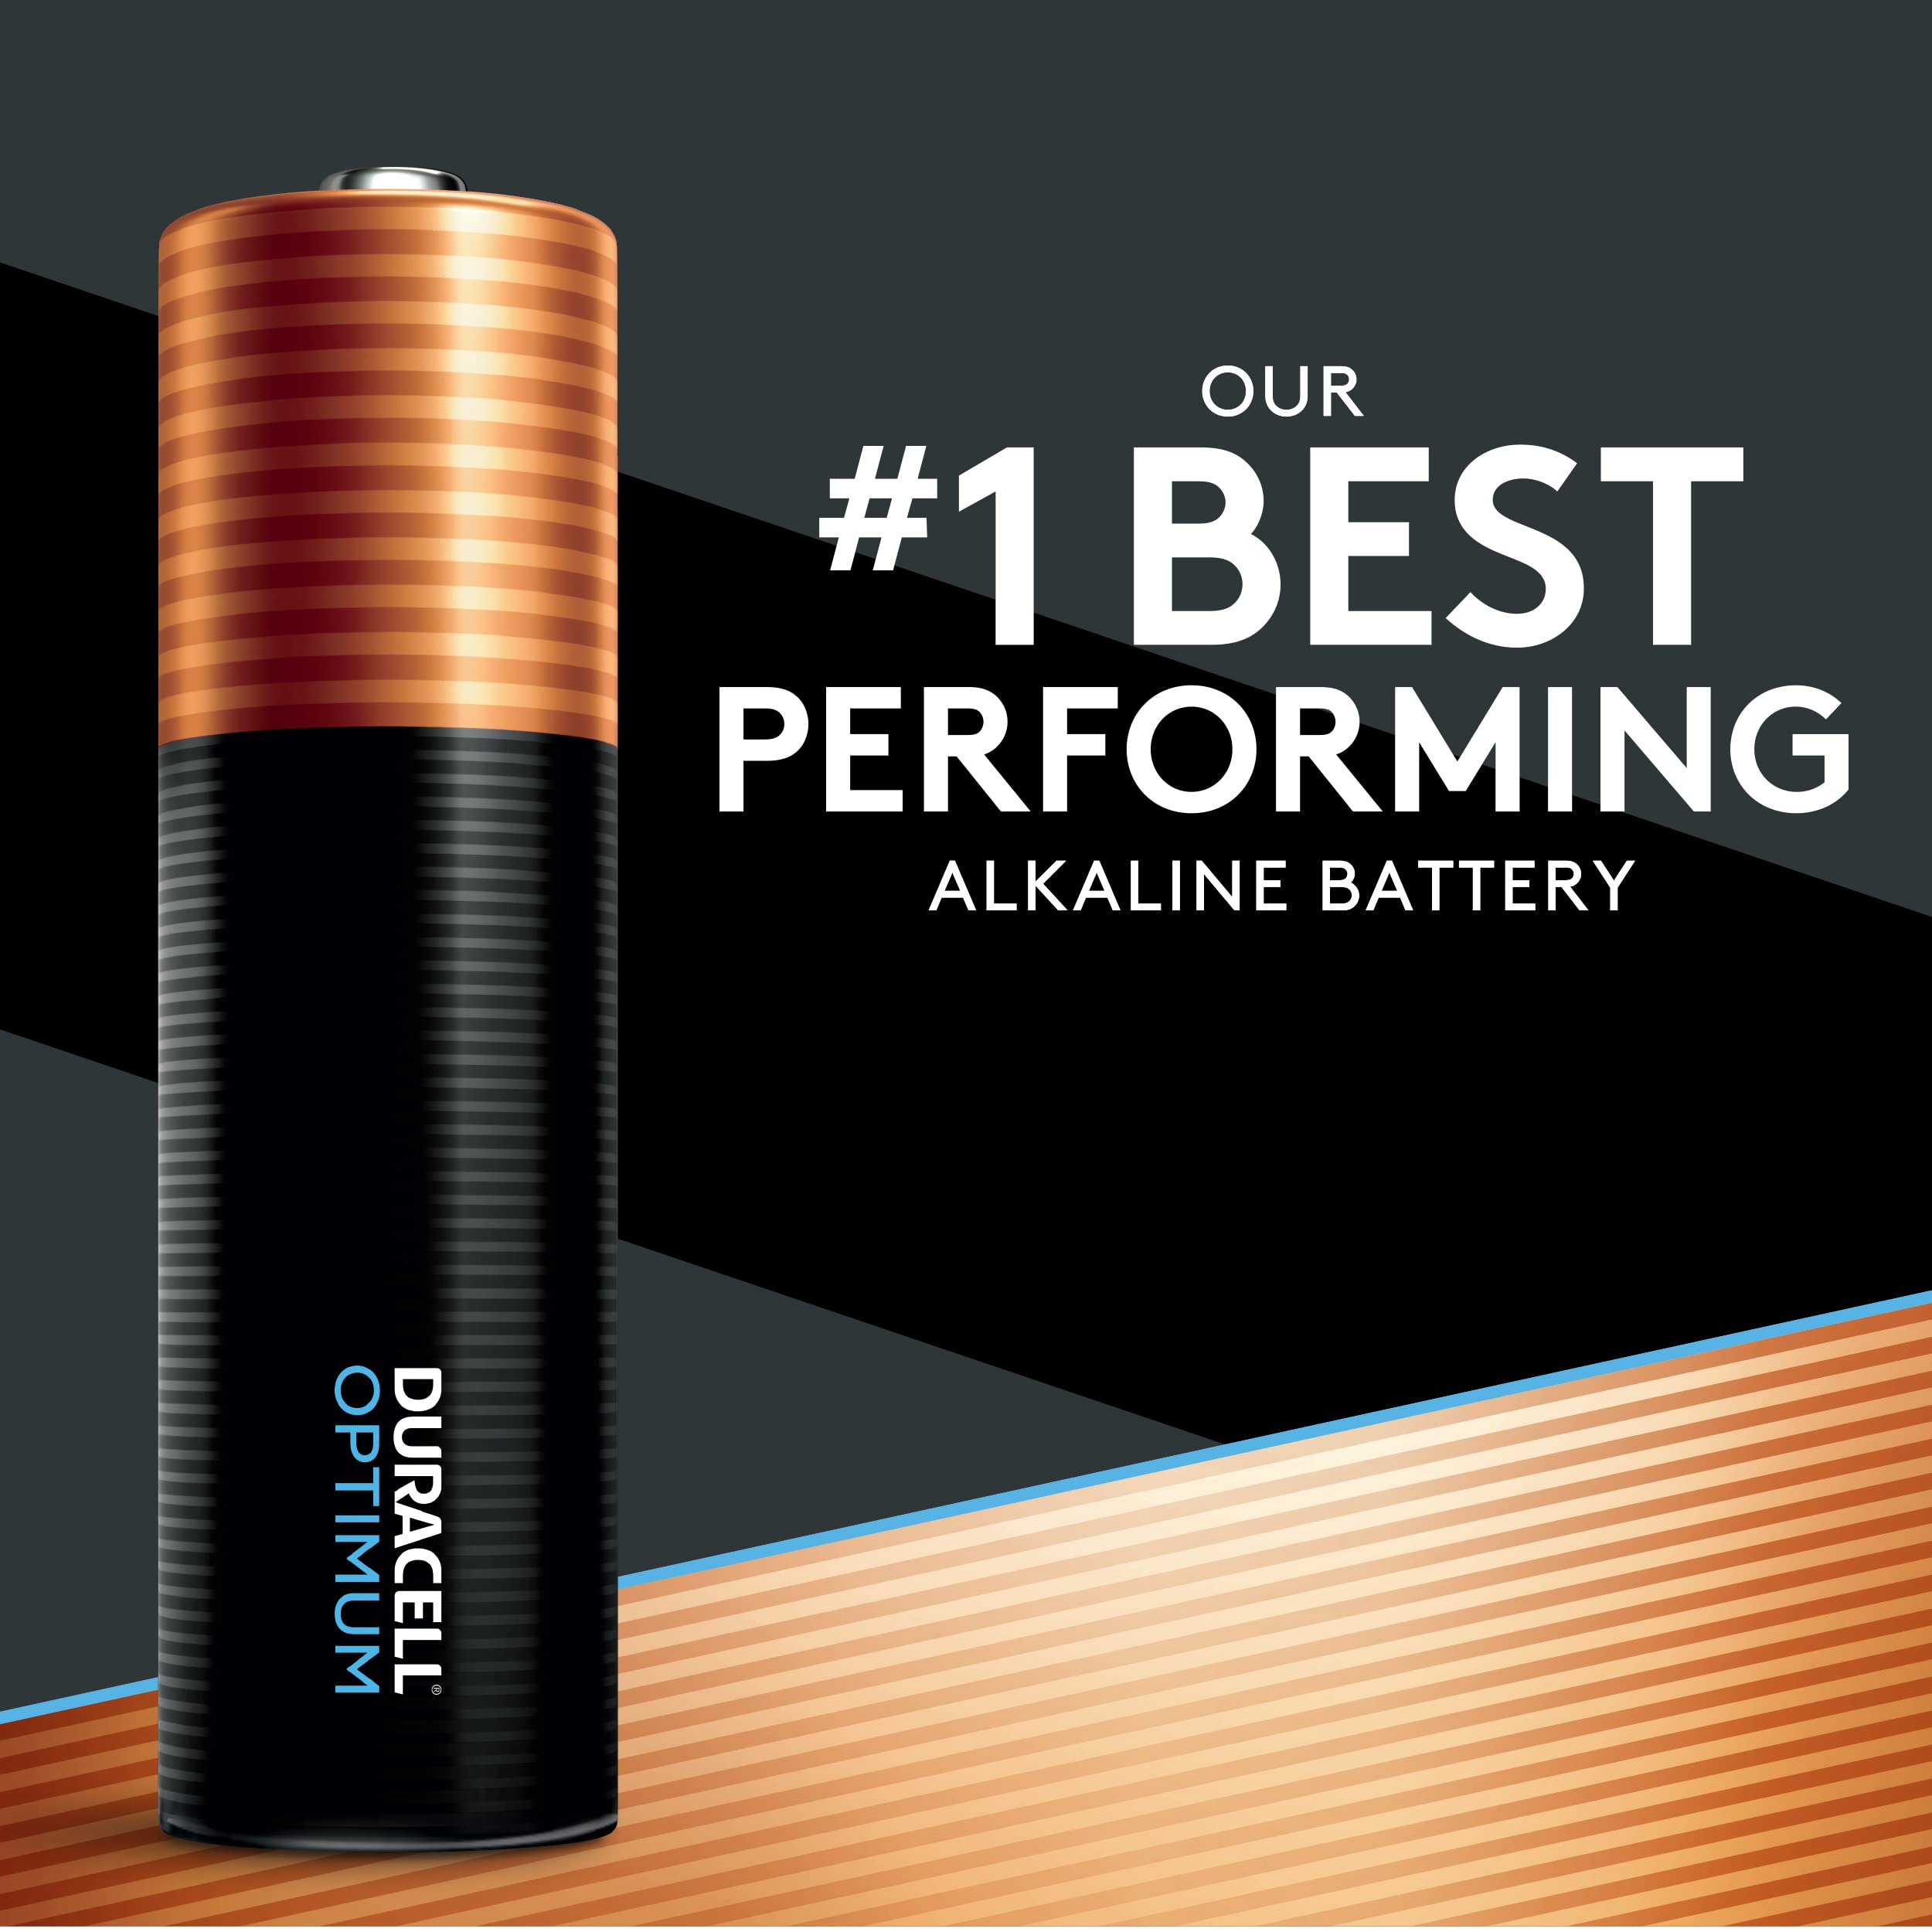 Duracell Optimum AA Batteries with Power Boost Ingredients, 18 Count Pack Double A Battery with Long-lasting Power, All-Purpose Alkaline AA Battery for Household and Office Devices